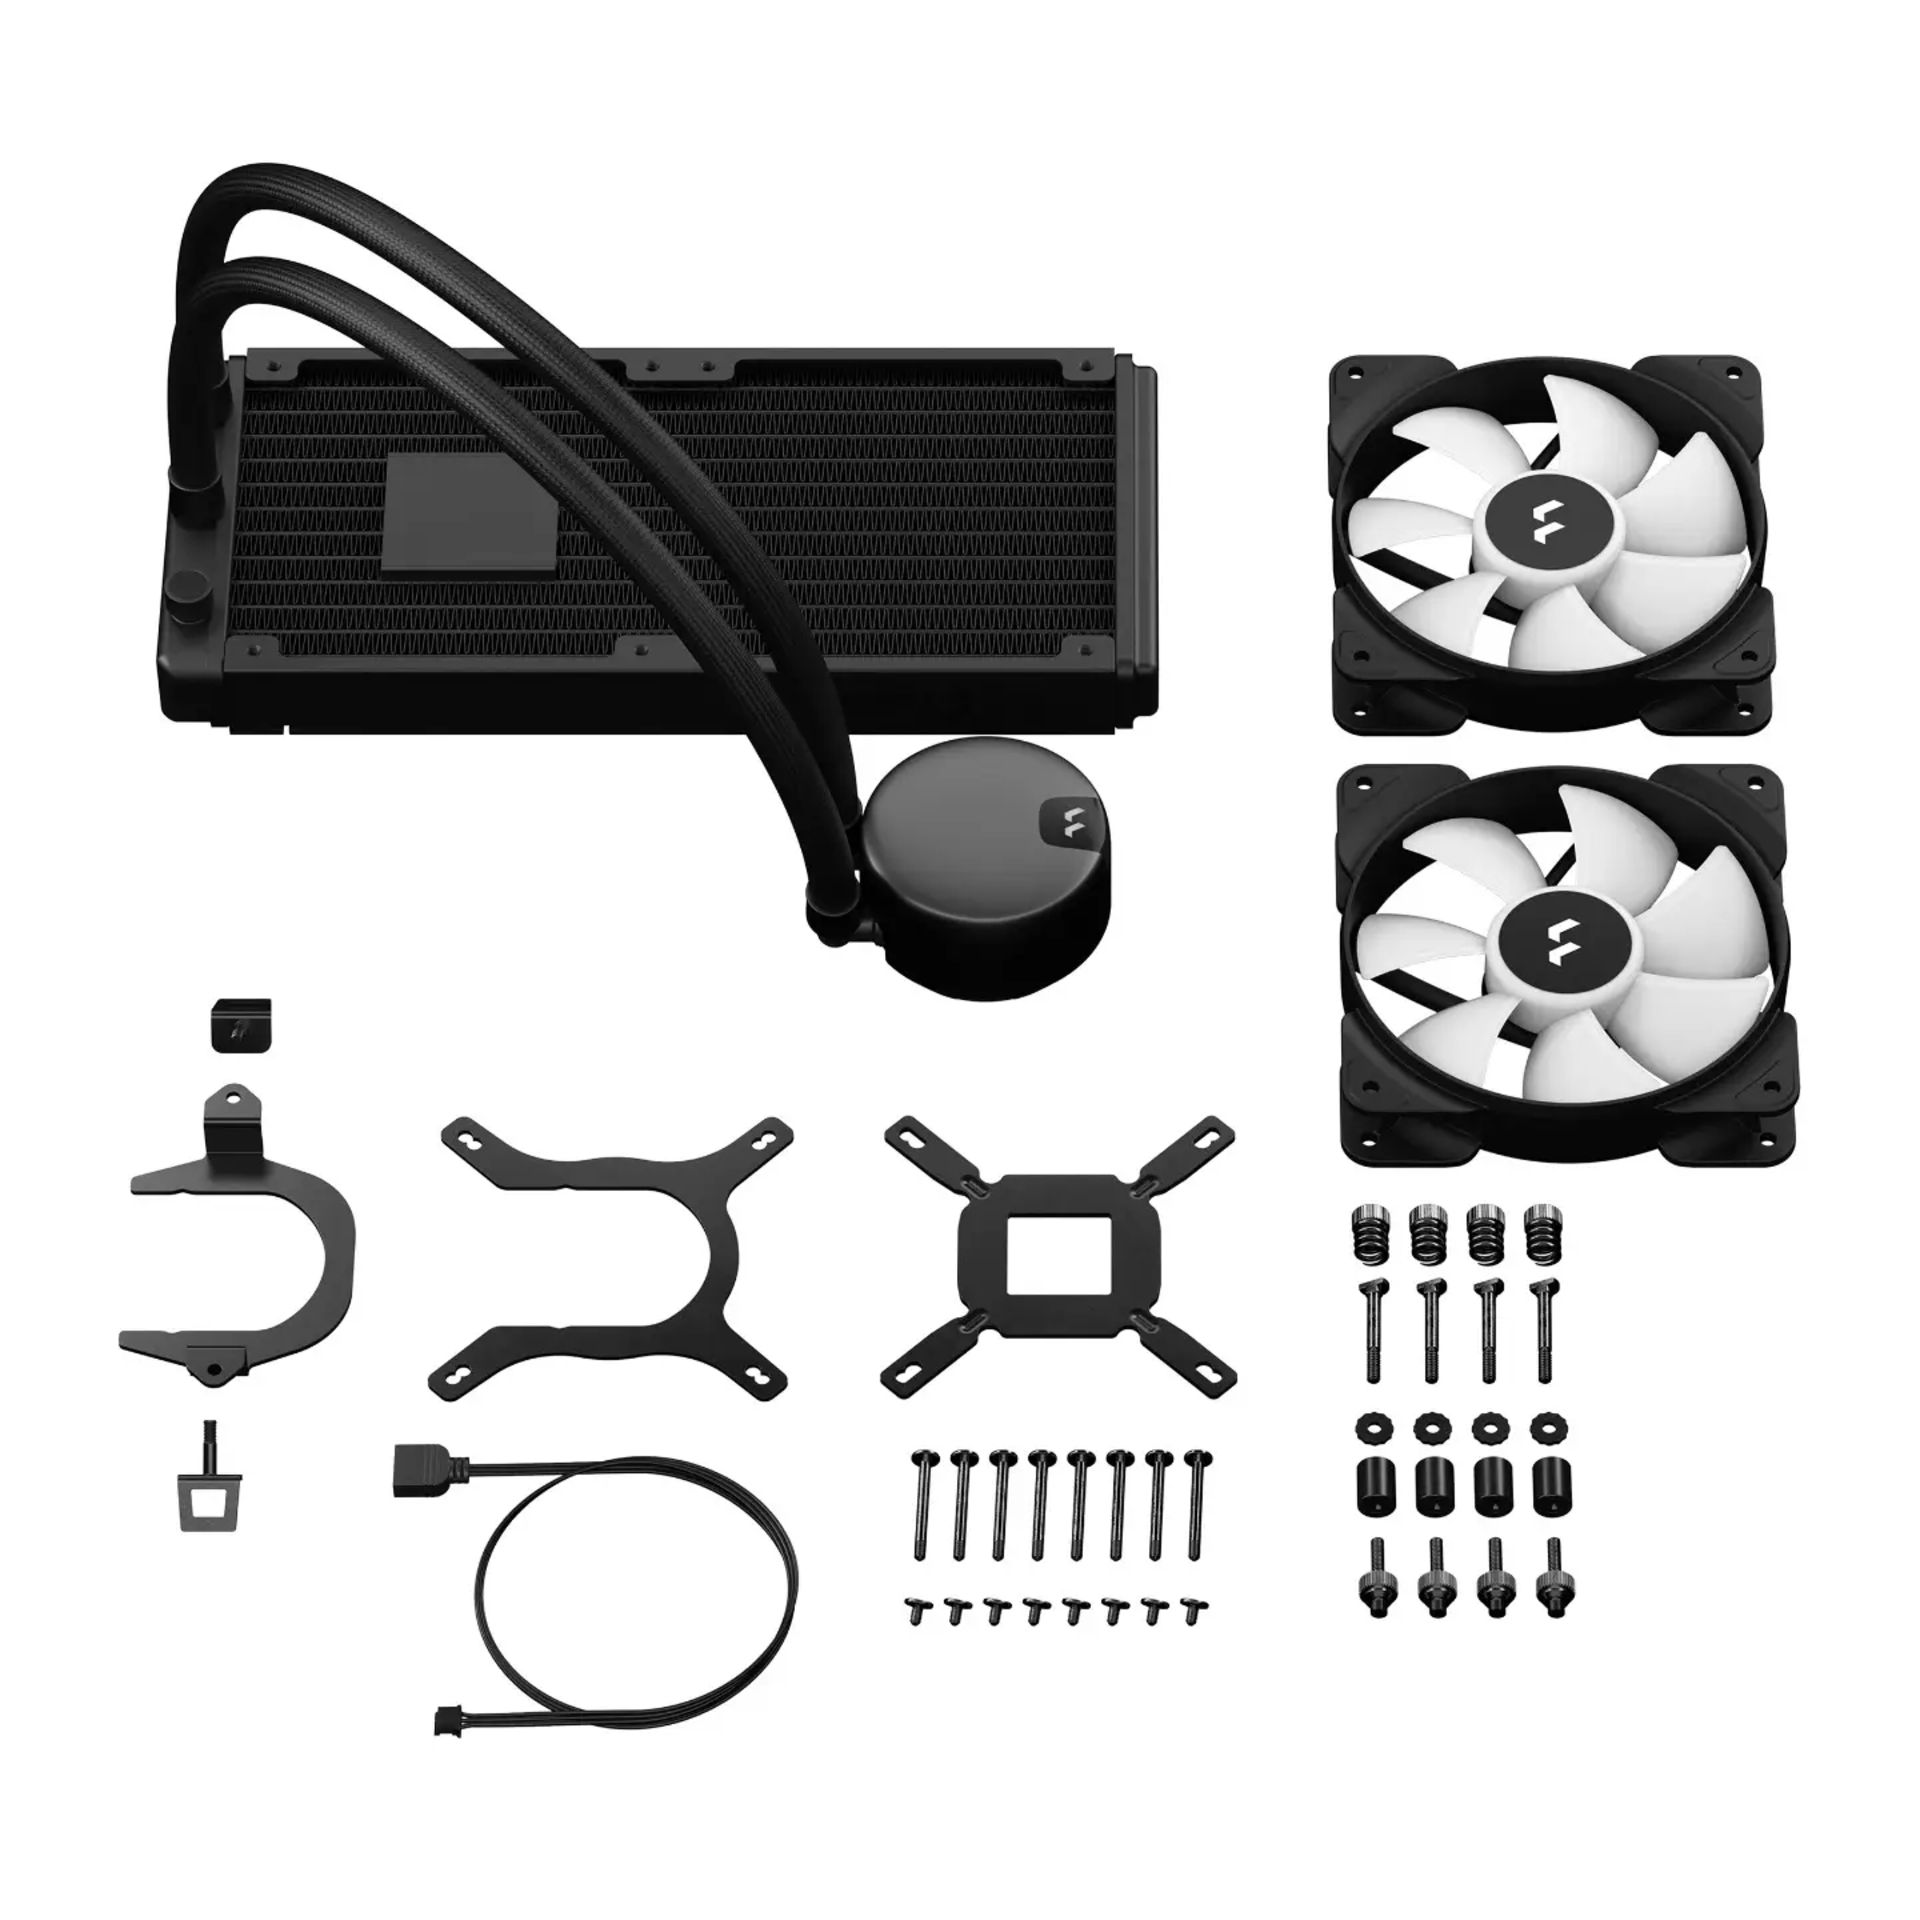 BRAND NEW FACTORY SEALED FRACTAL S24 RGB Aspect 12 RGB x2 AIO CPU Liquid Cooler. RRP £124.99. - Image 5 of 5